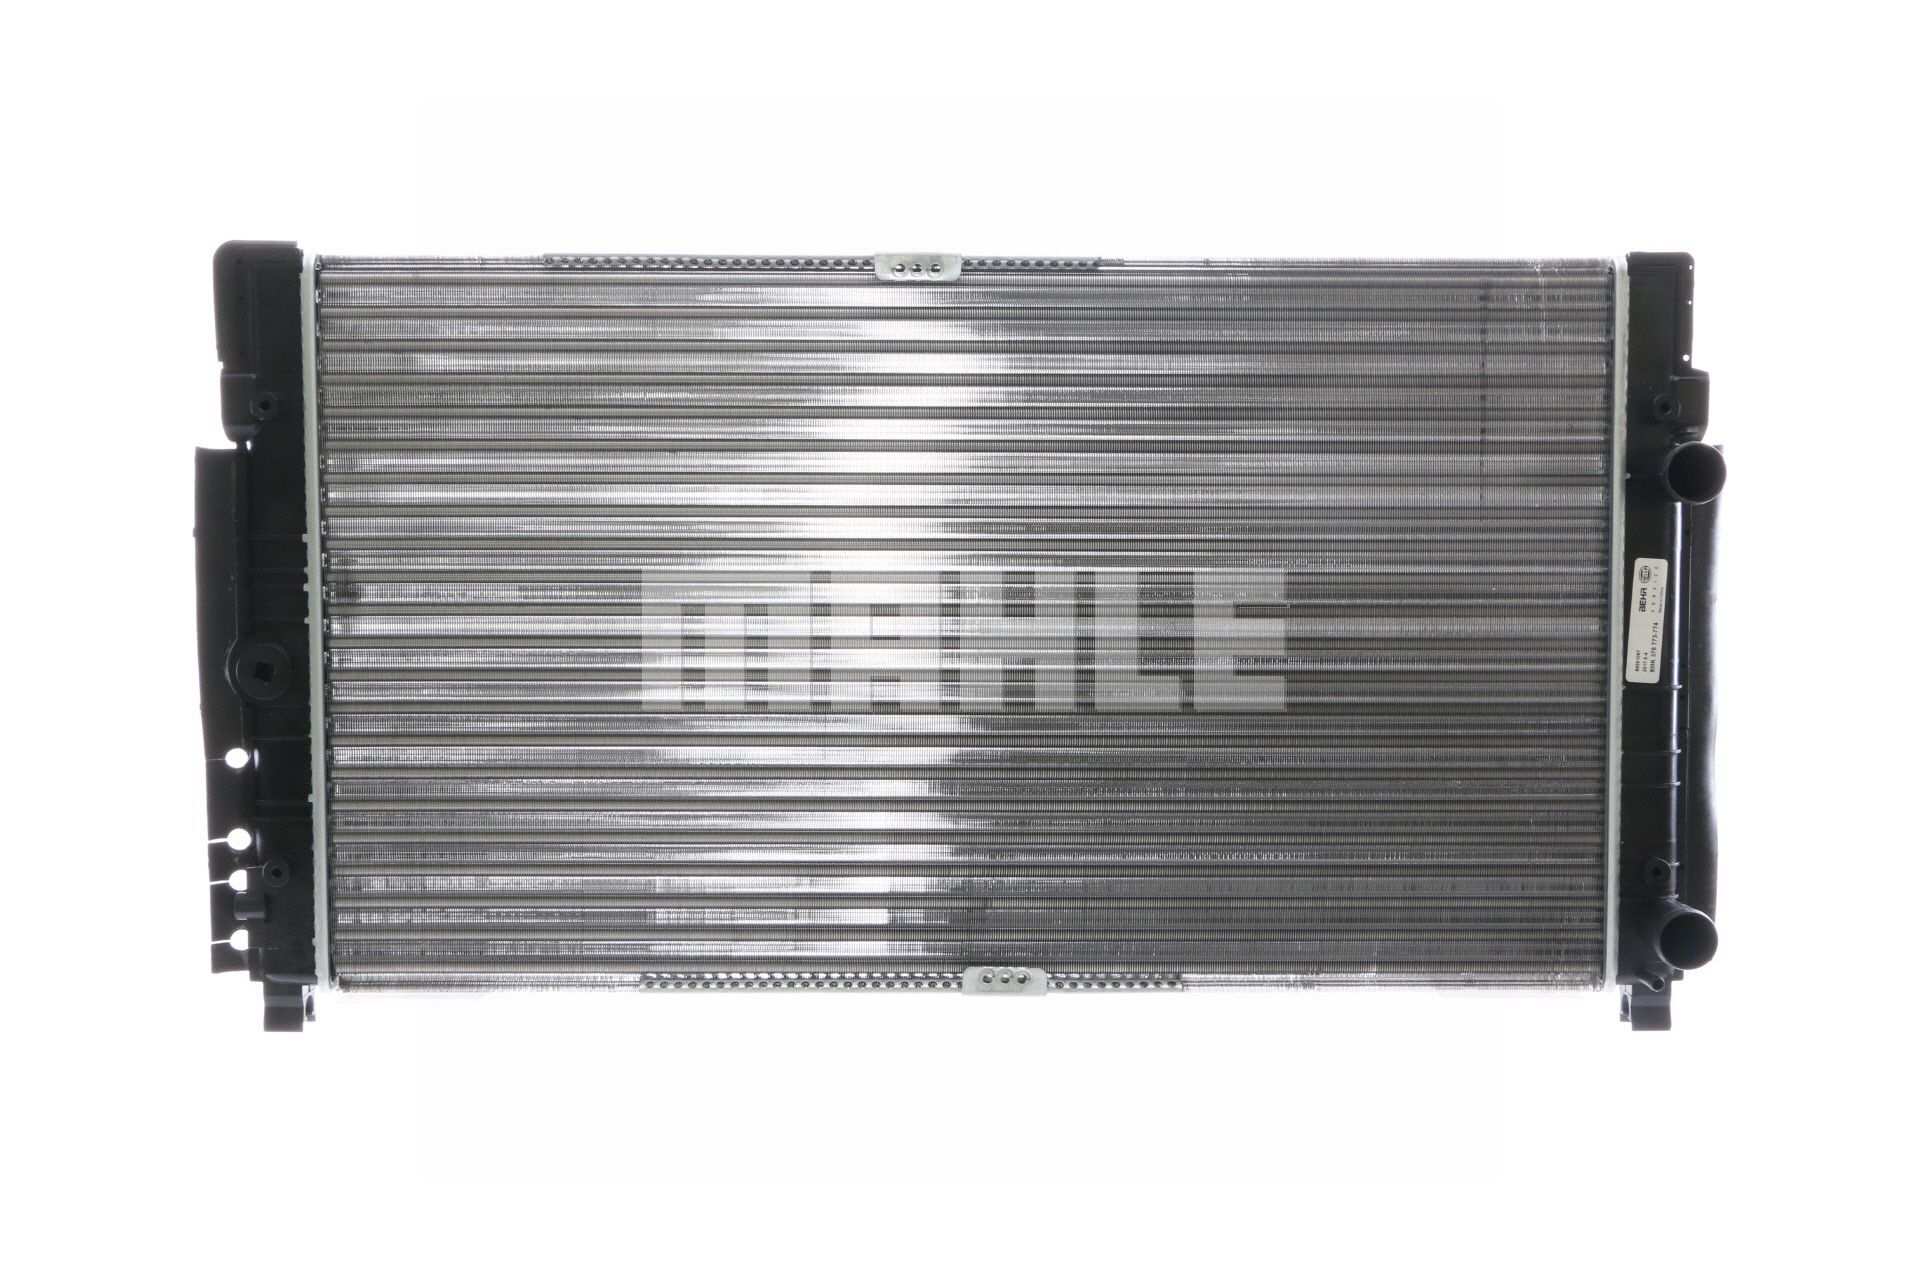 376773774 MAHLE ORIGINAL for vehicles with long driver cab, 720 x 414 x 34 mm, Mechanically jointed cooling fins Radiator CR 1533 000S buy